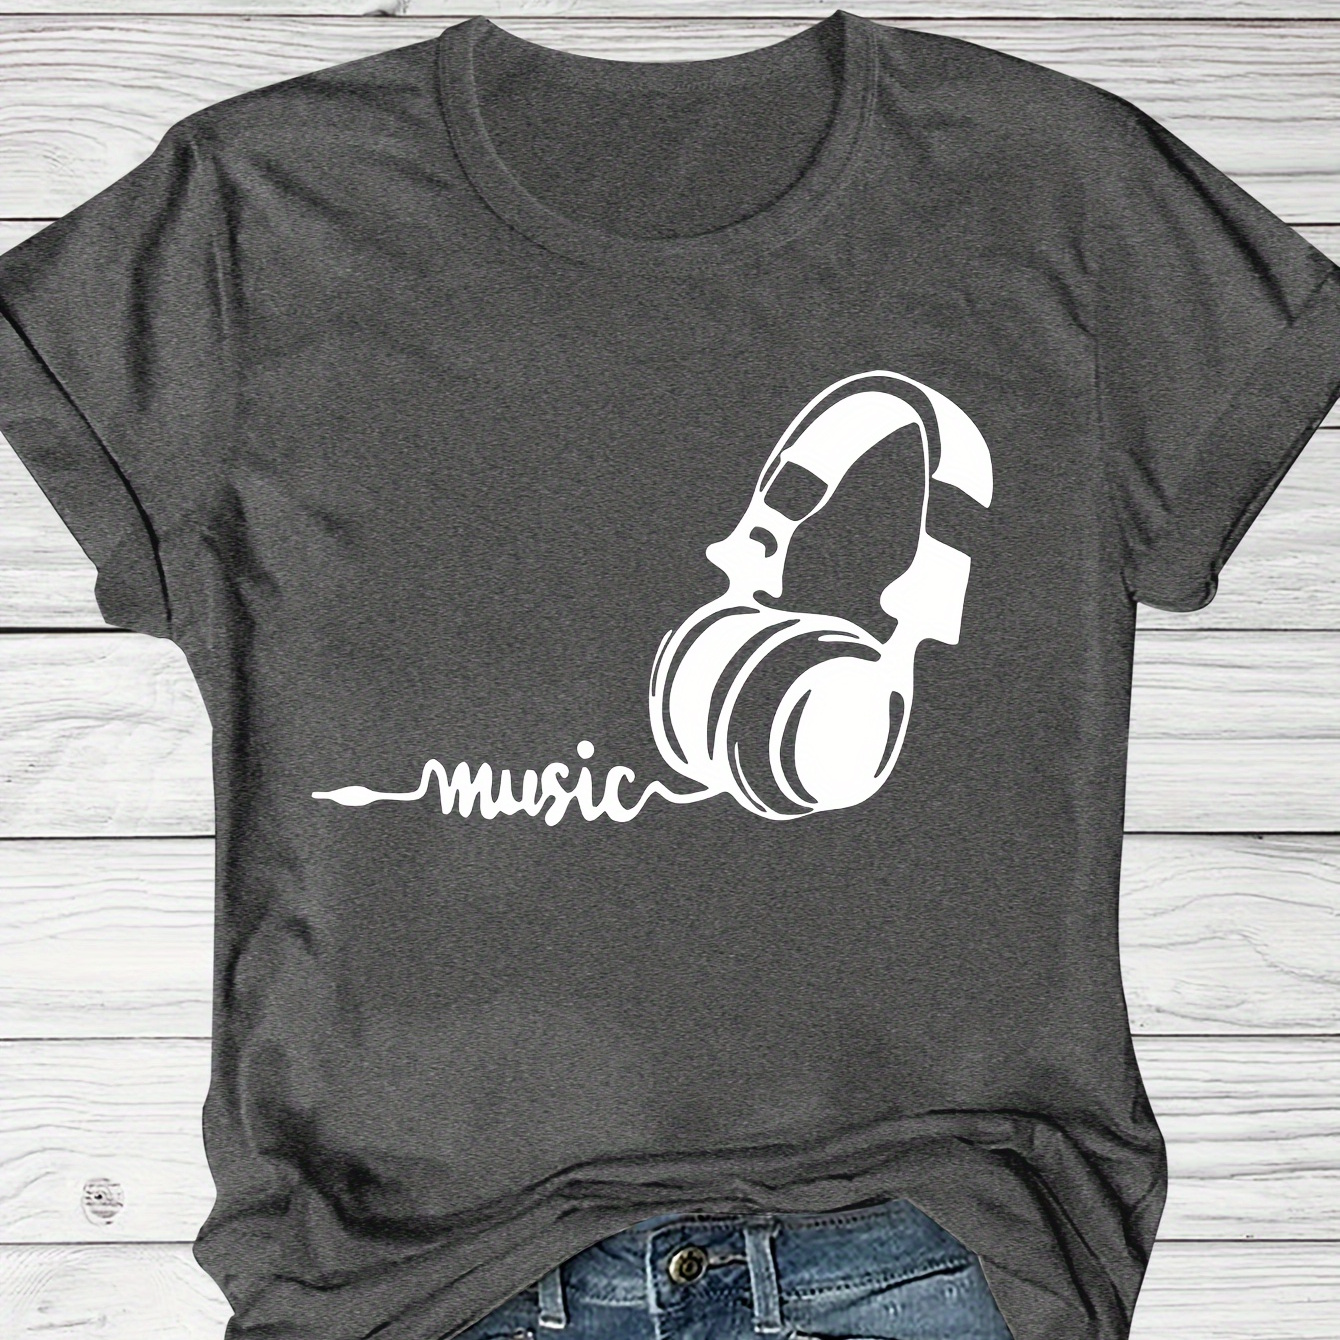 

Music Festival Theme Print T-shirt, Short Sleeve Crew Neck Casual Top For Summer & Spring, Women's Clothing